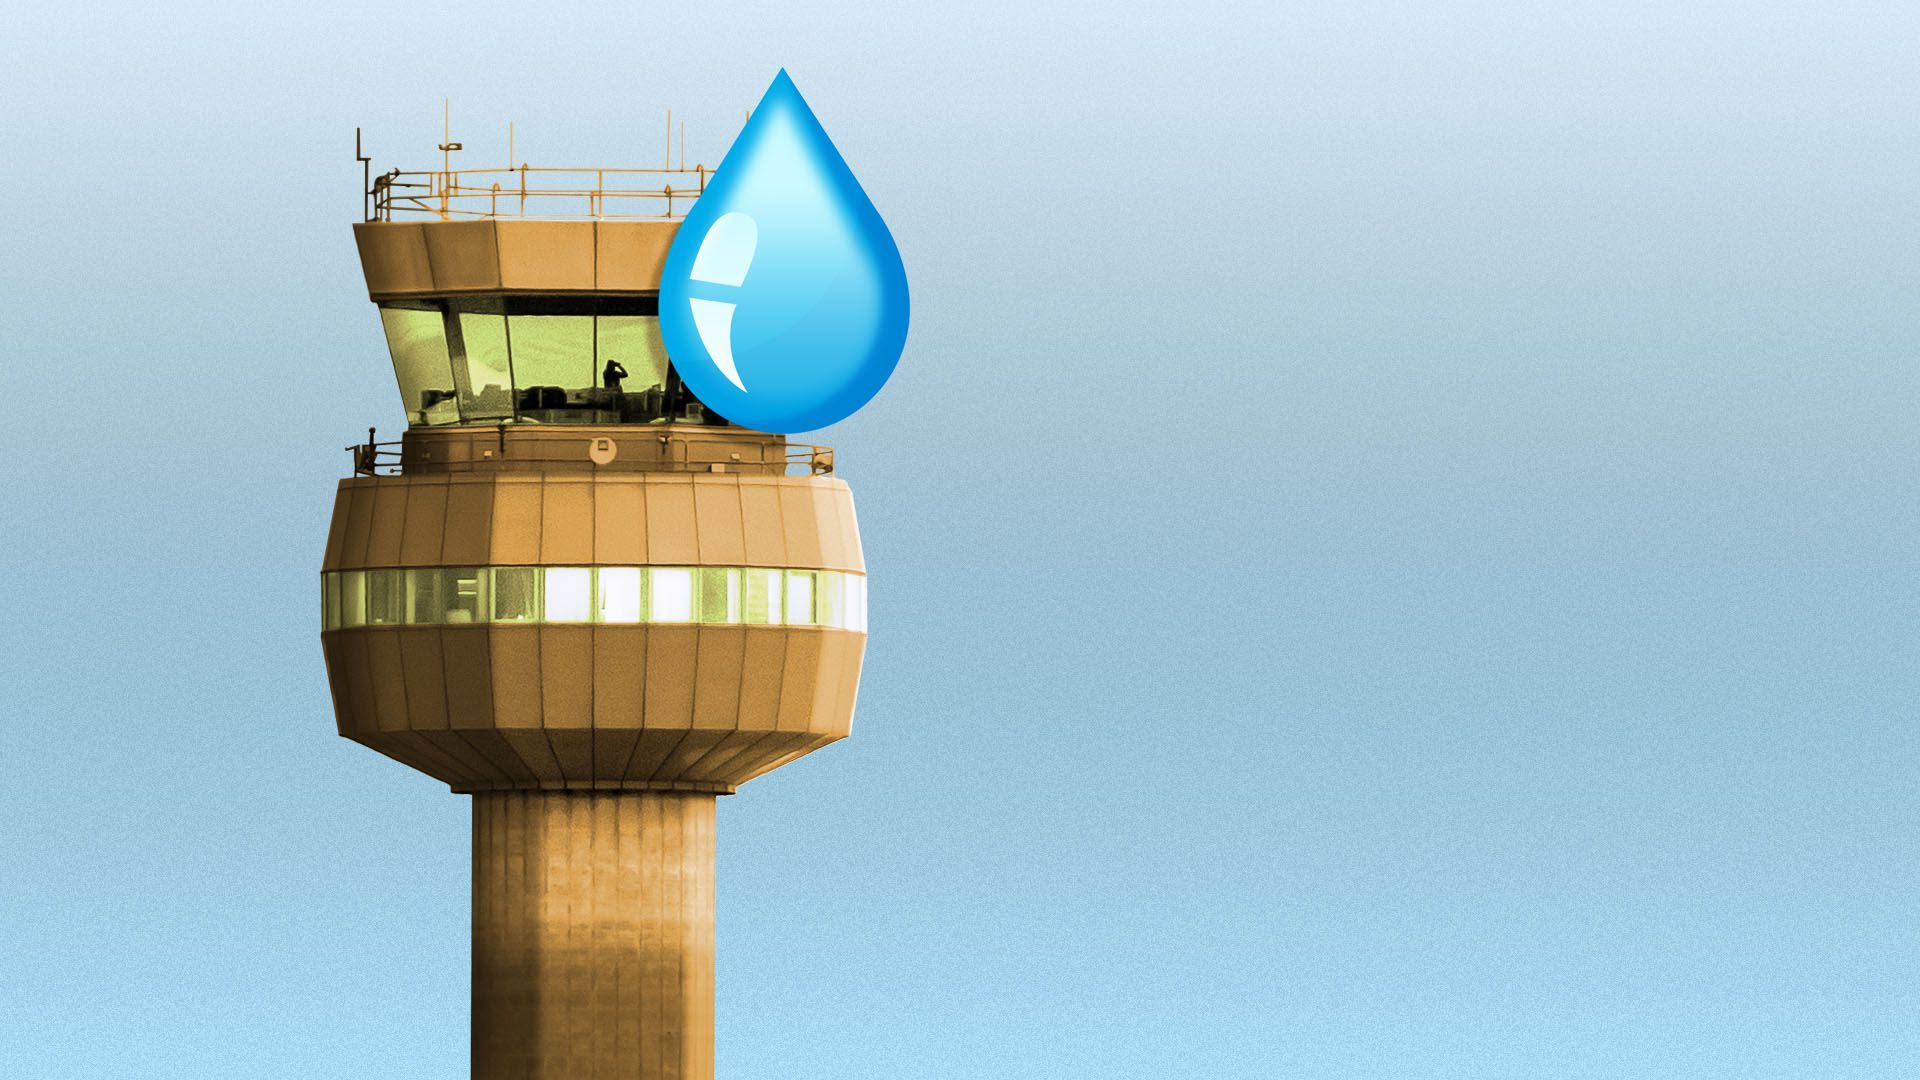 Illustration of an airport control tower with a giant sweat drop